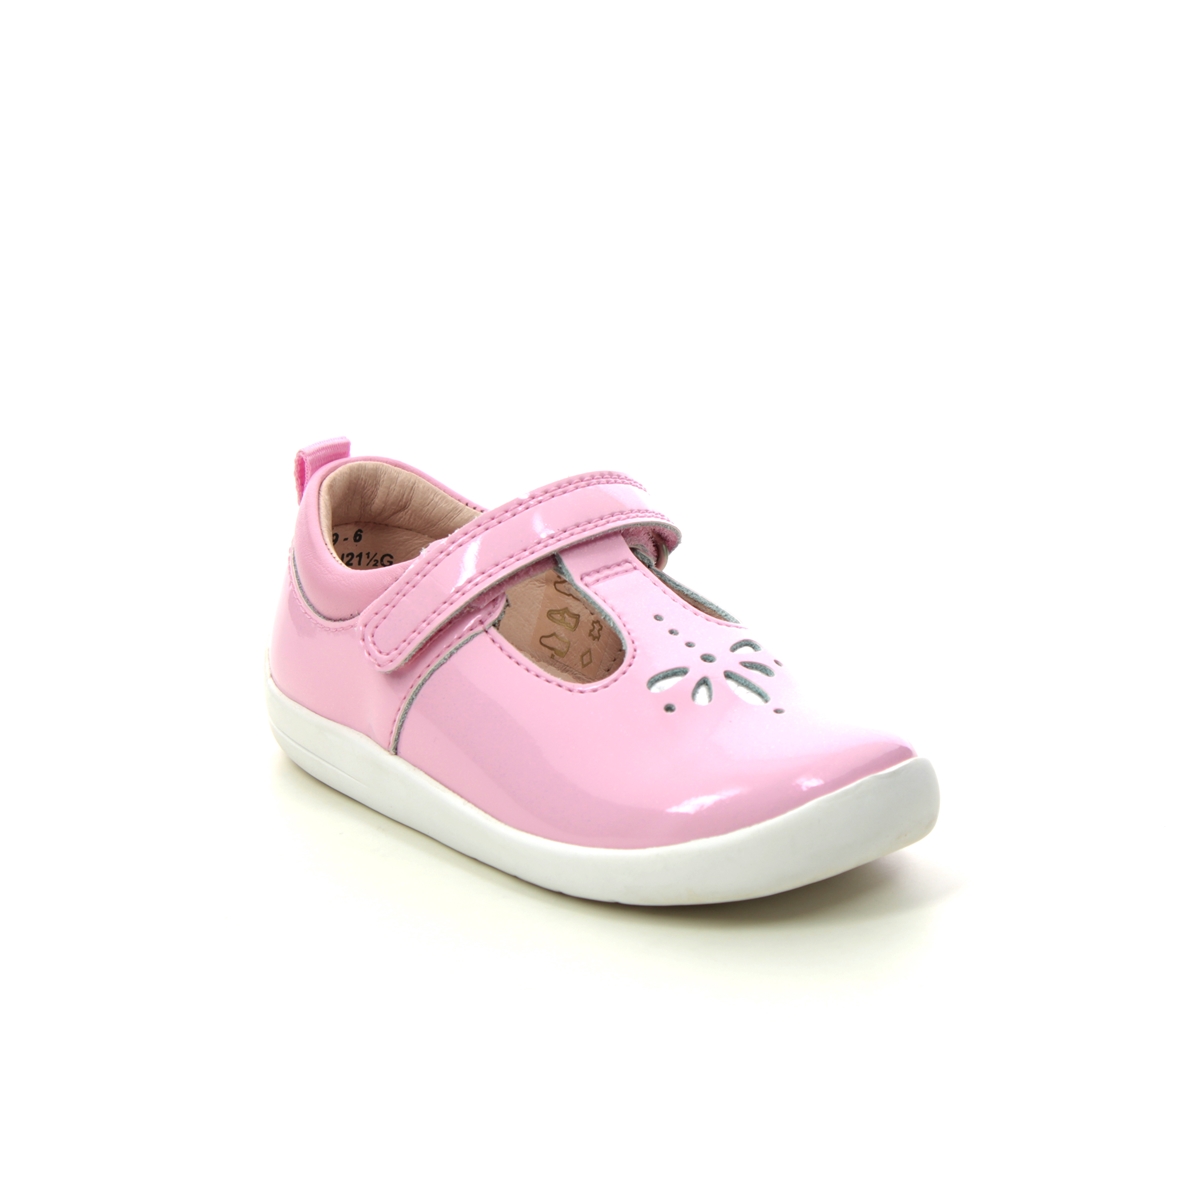 Start Rite - Puzzle In Pink 0779-67G In Size 6.5 In Plain Pink 1St Shoes & Prewalkers  In Pink For kids